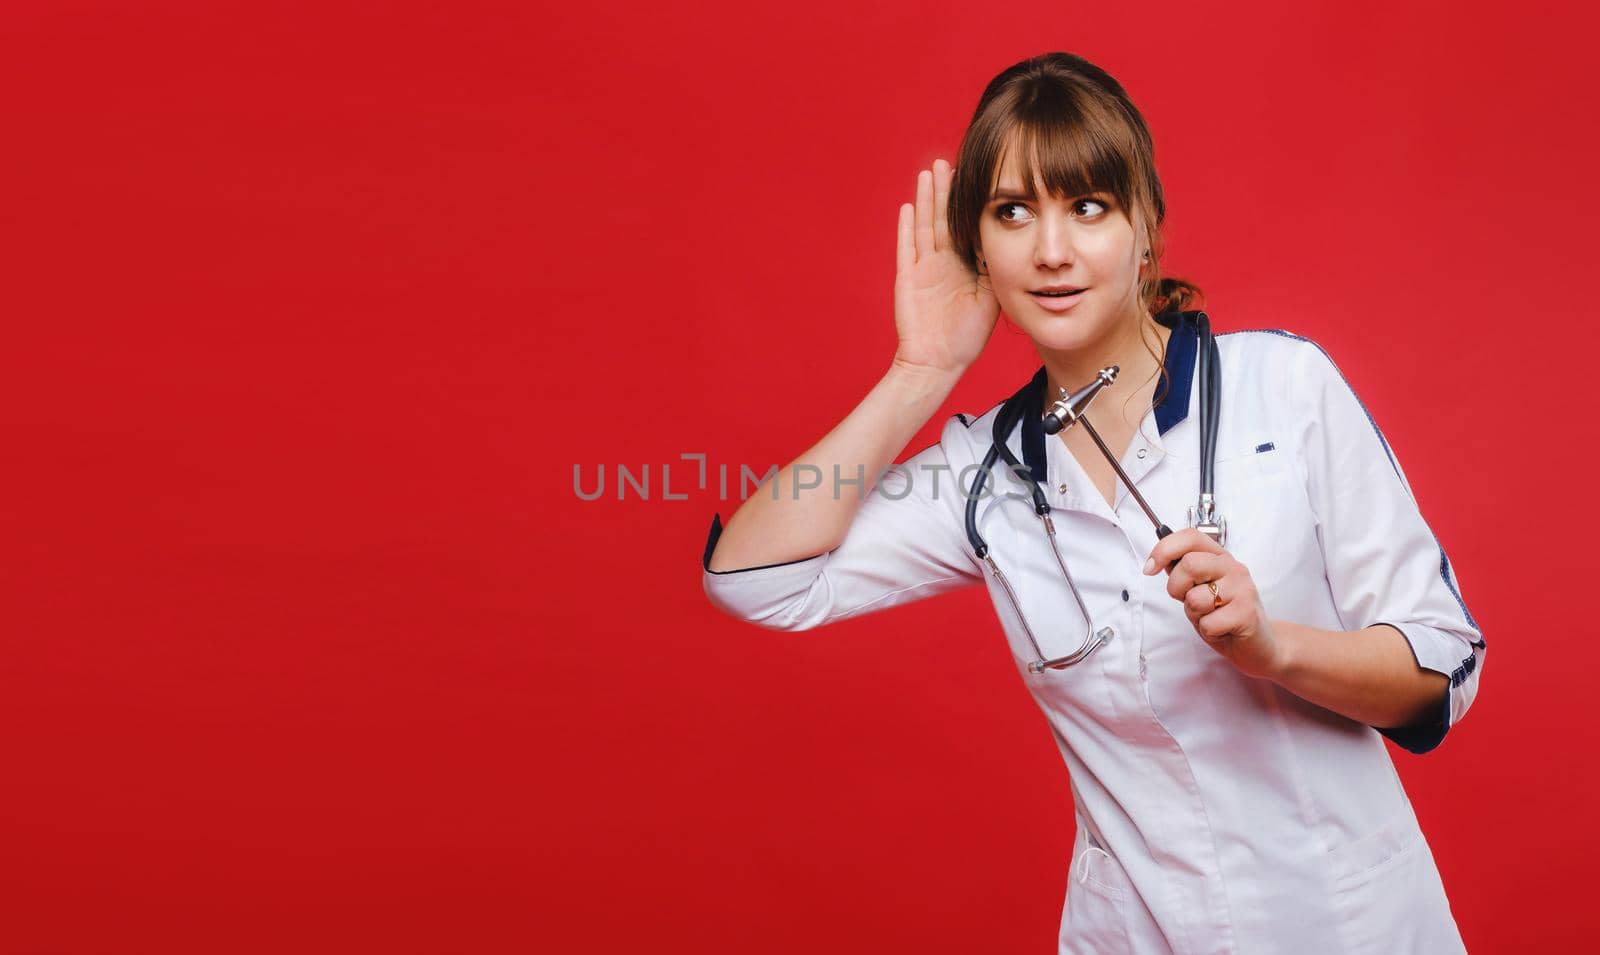 A doctor in a white coat on a red background holds a neurological hammer and listens to something by Lobachad